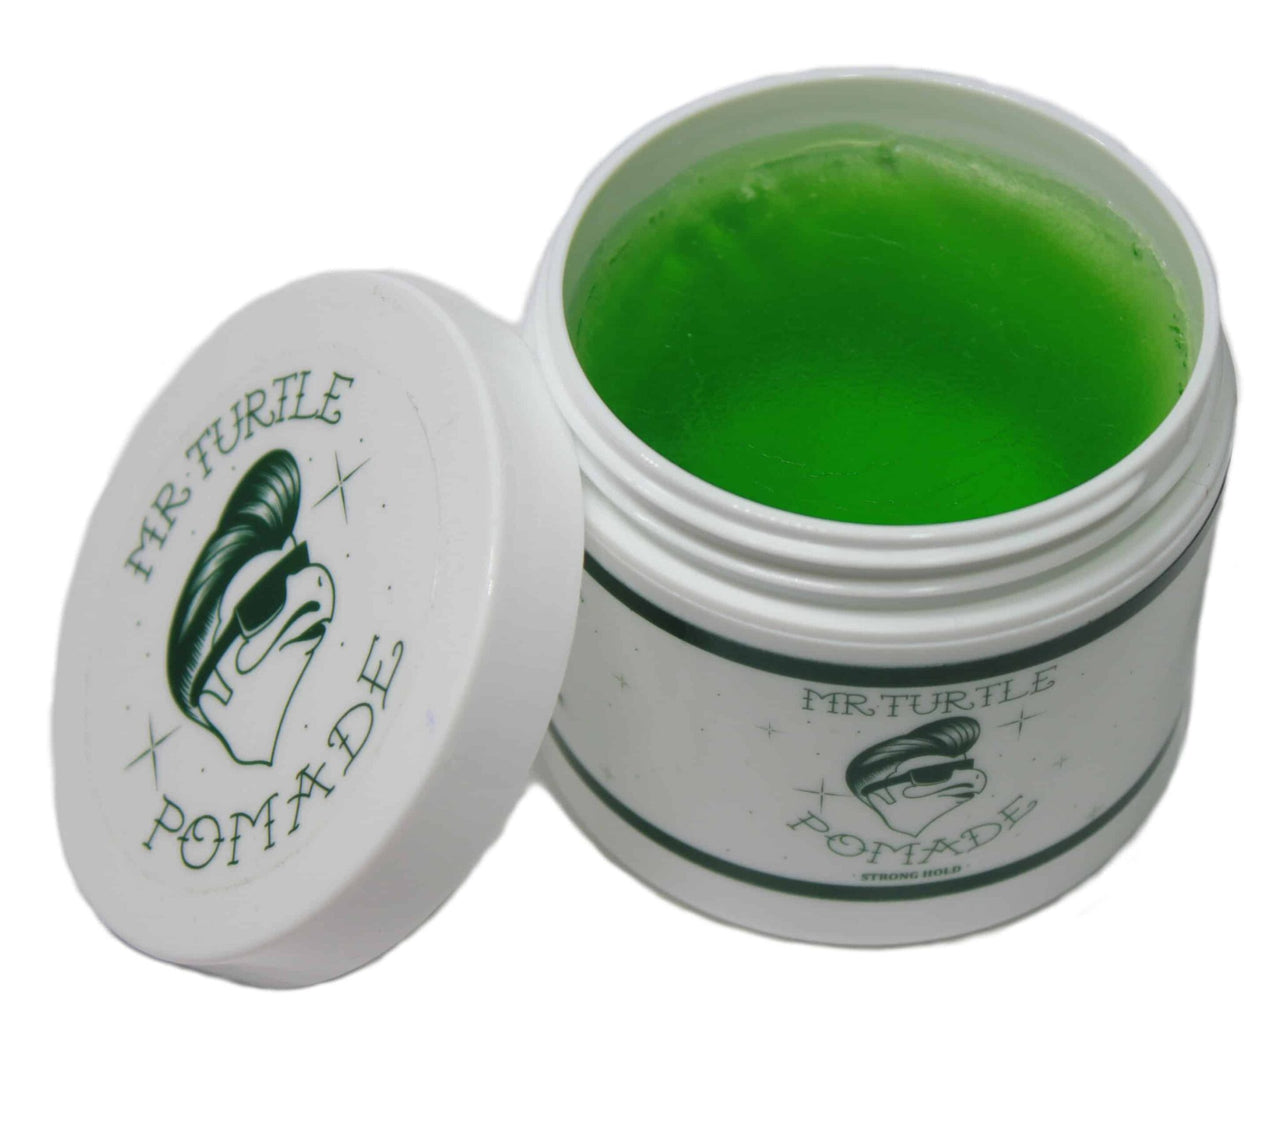 Mr. Turtle Strong Hold Pomade 4oz